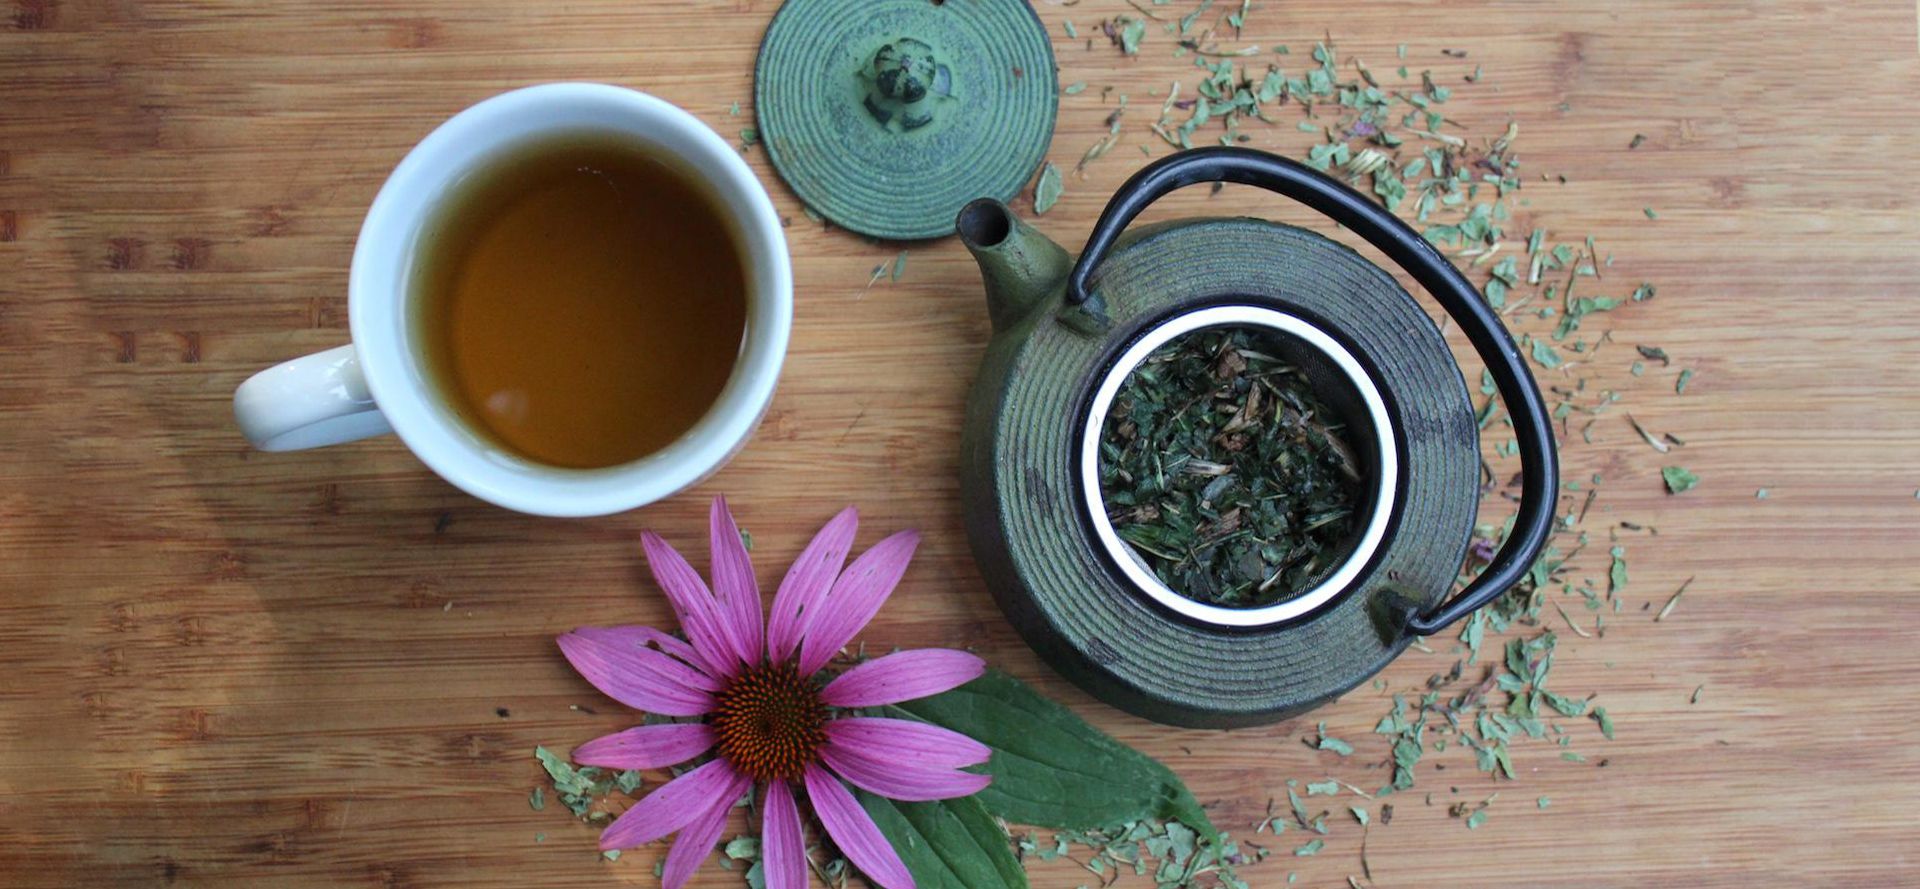 Cup And Kettle Of Echinacea Tea.